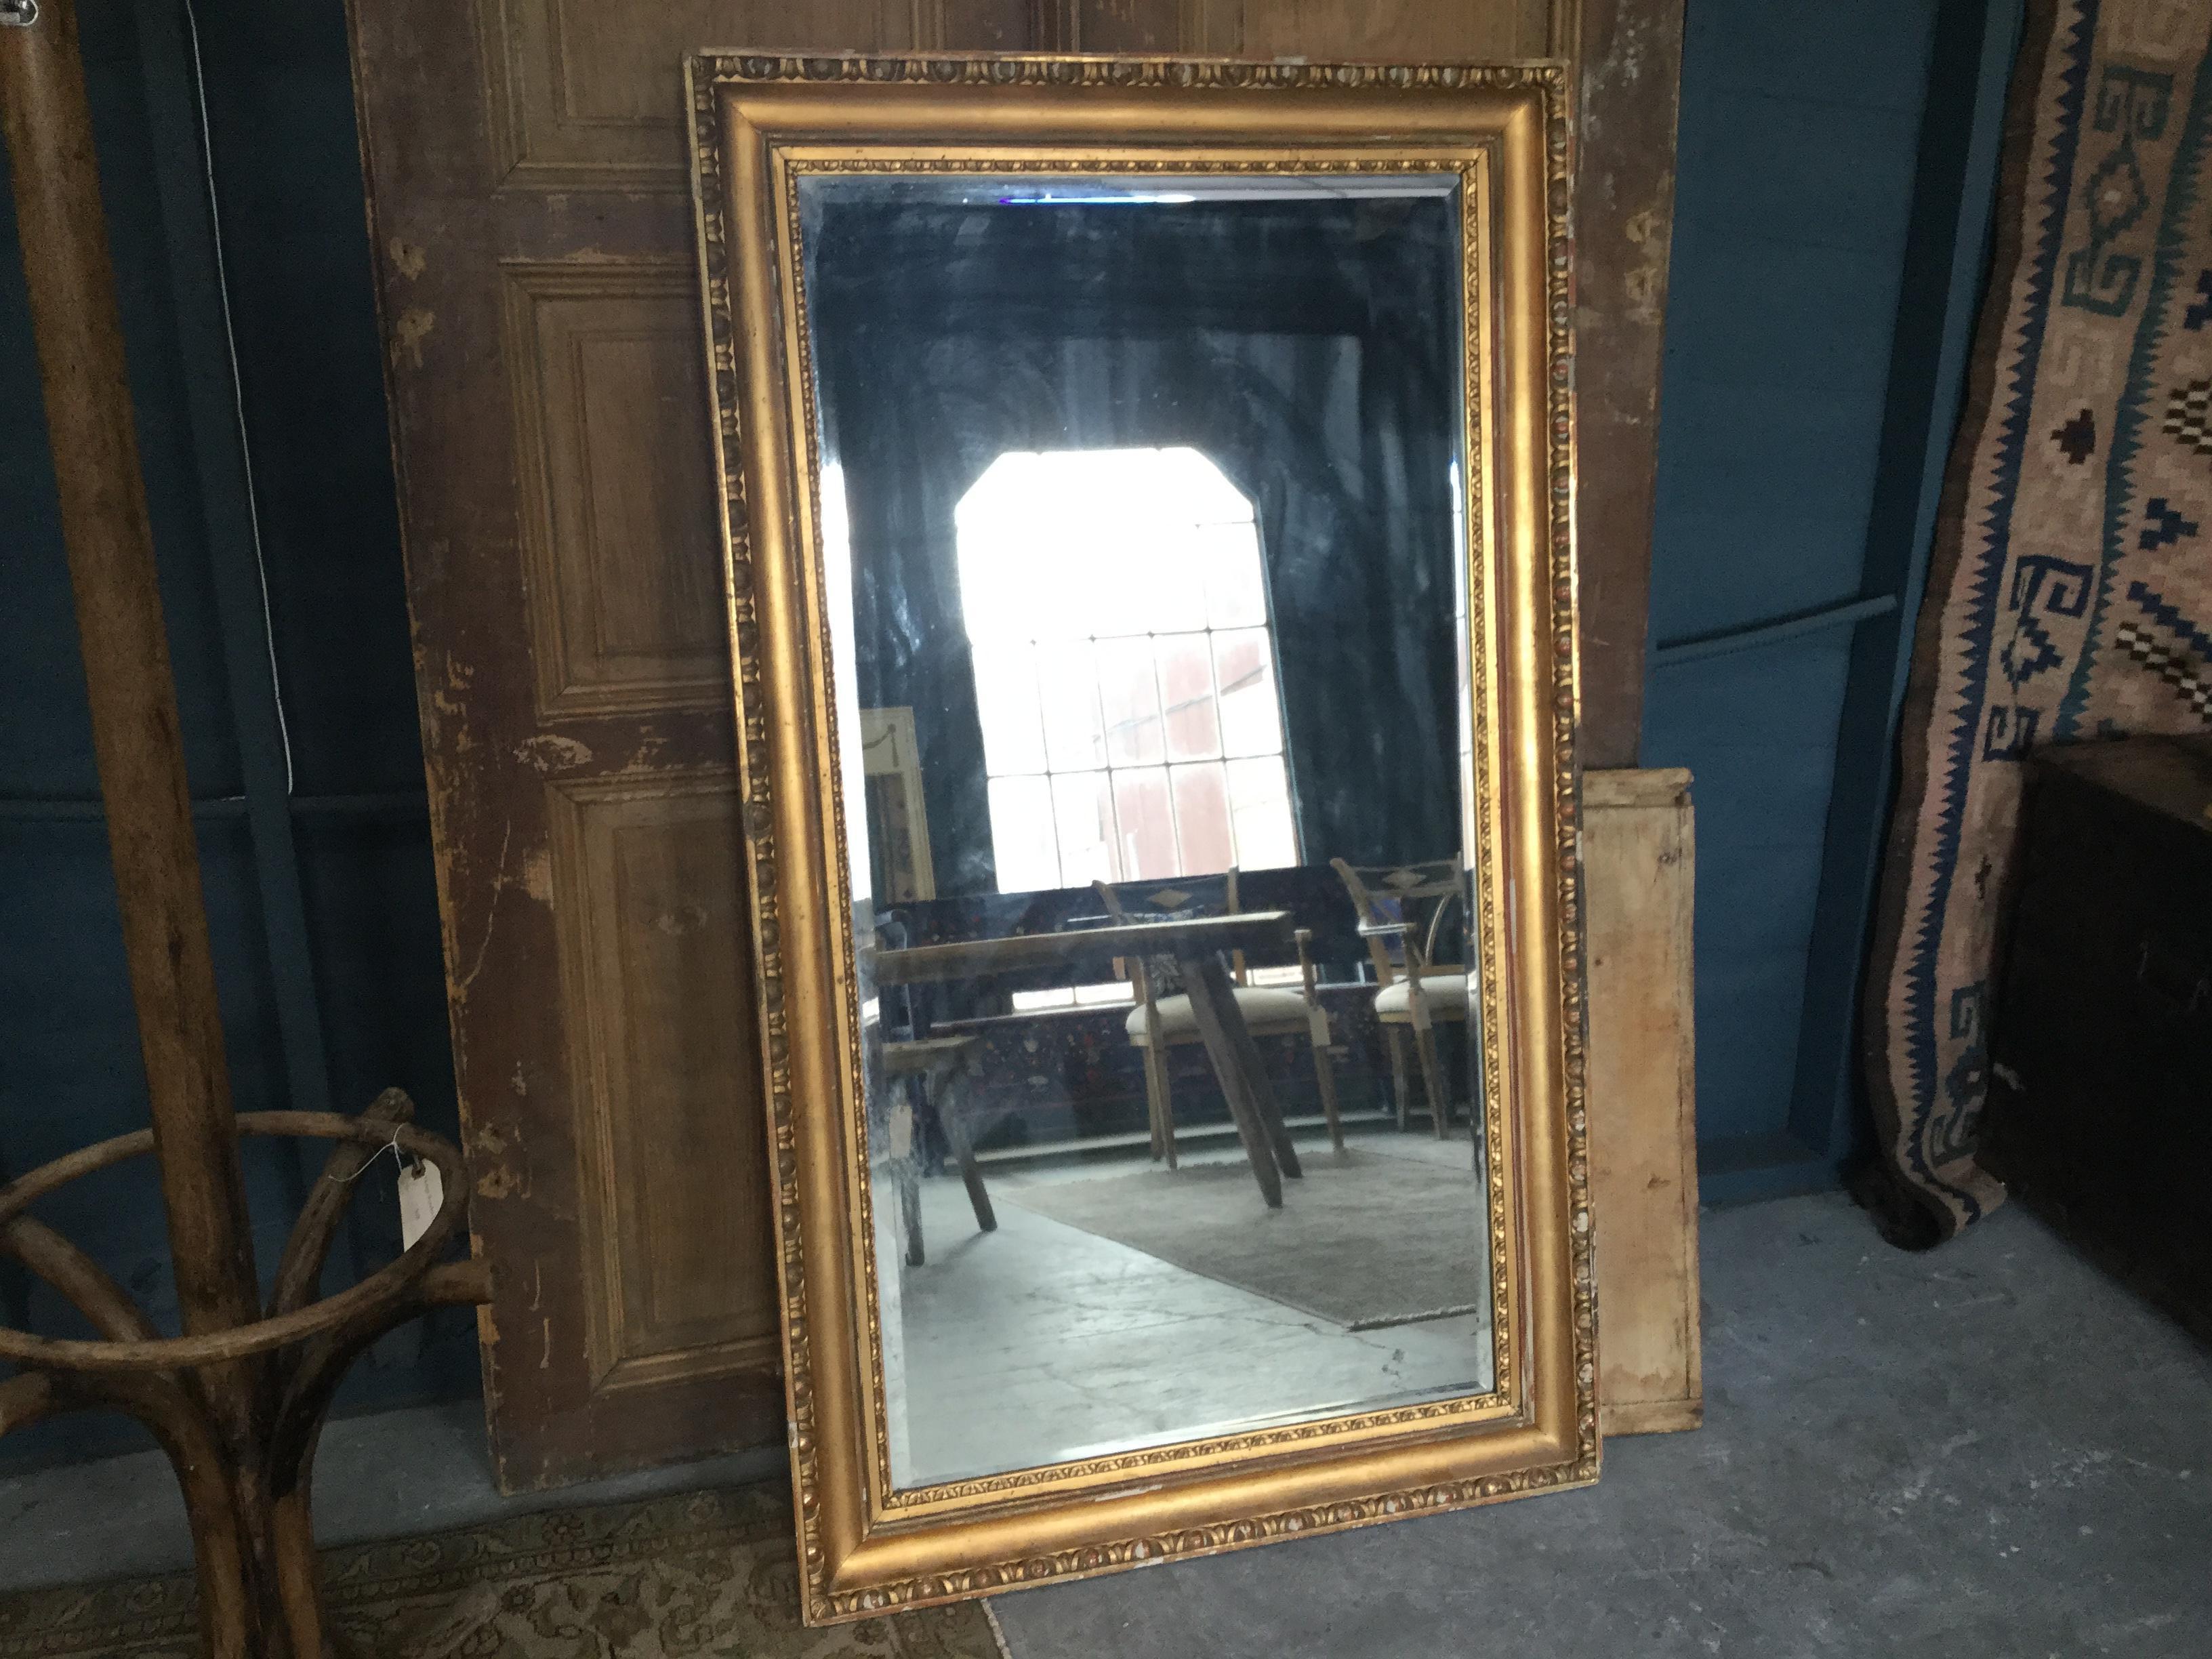 Vintage European gilded mirror with fine detailing. This neoclassical mirror is a beautiful accent in any type of space.